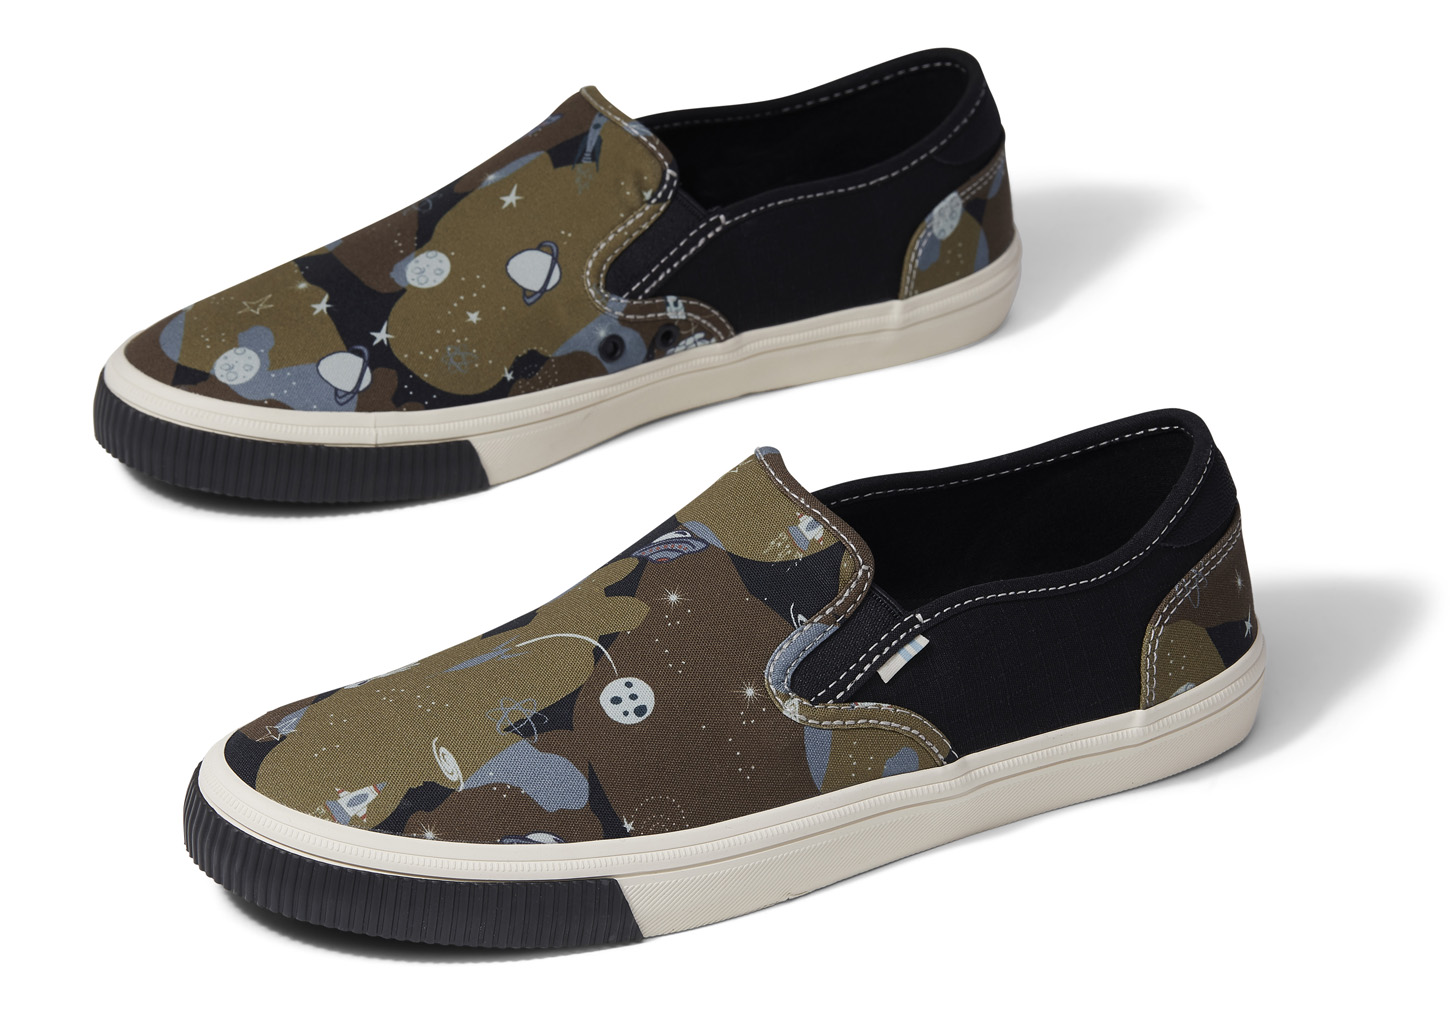 Toms Shoes: Men's or Women's Alpargatas Slip-Ons $21, More + Free Shipping on $75+